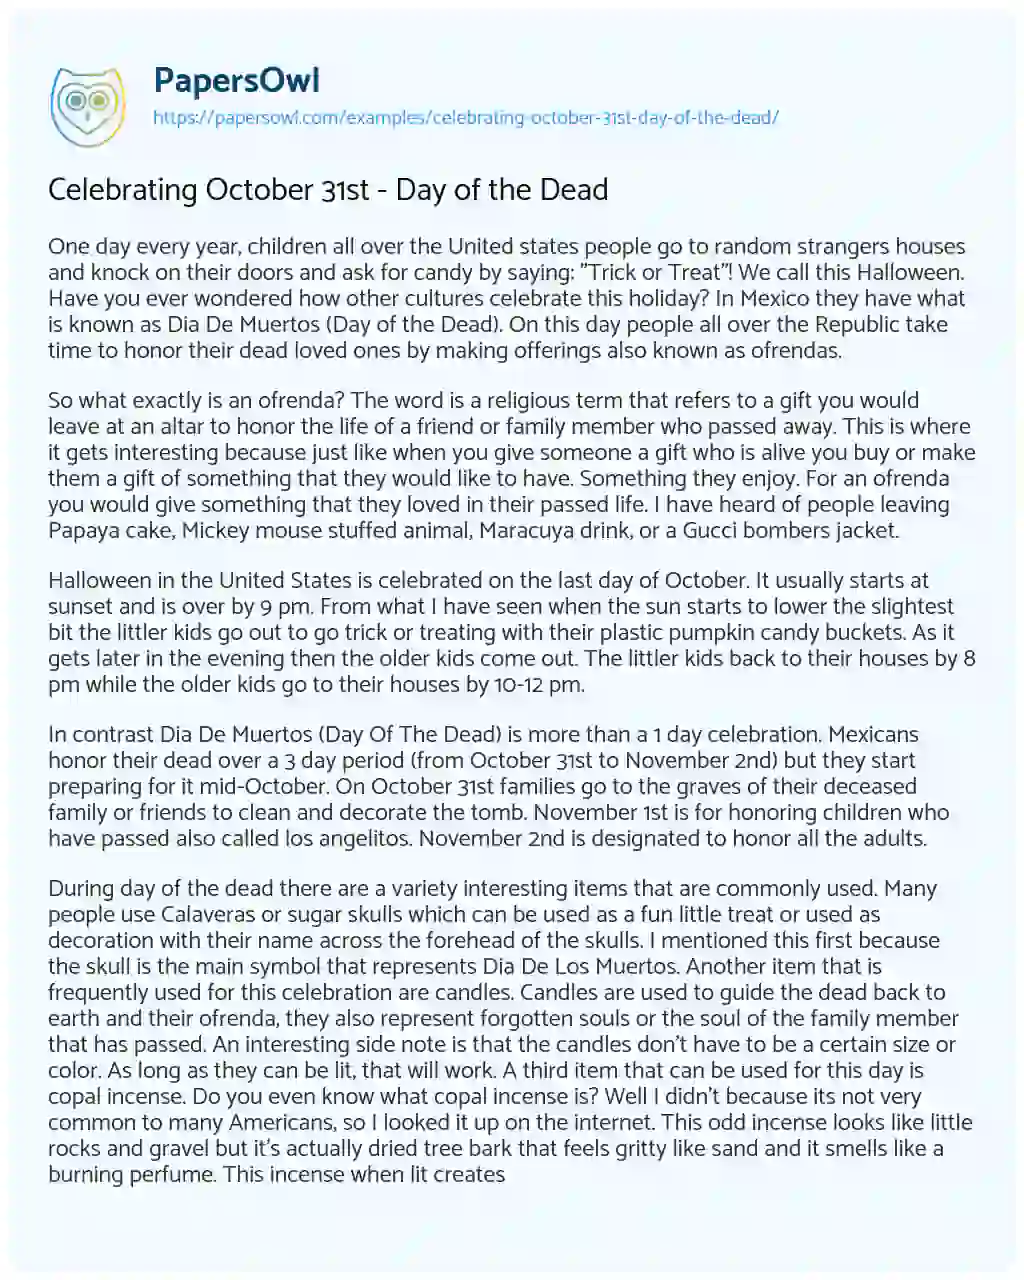 Essay on Celebrating October 31st – Day of the Dead